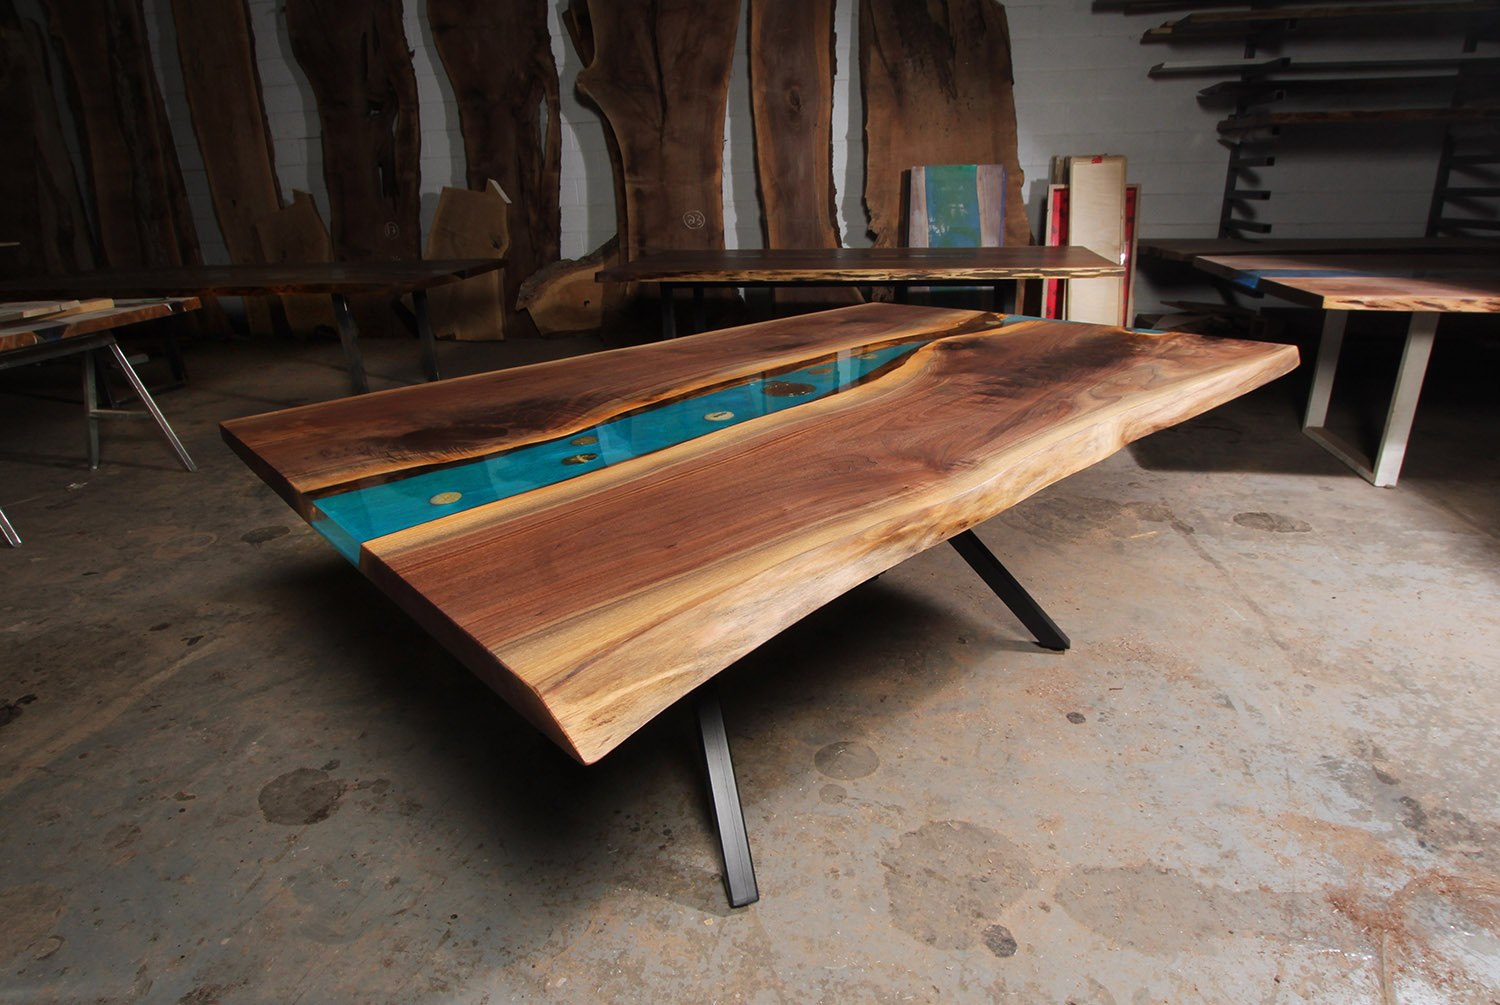 Live Edge Walnut River Dining Table with K shaped legs